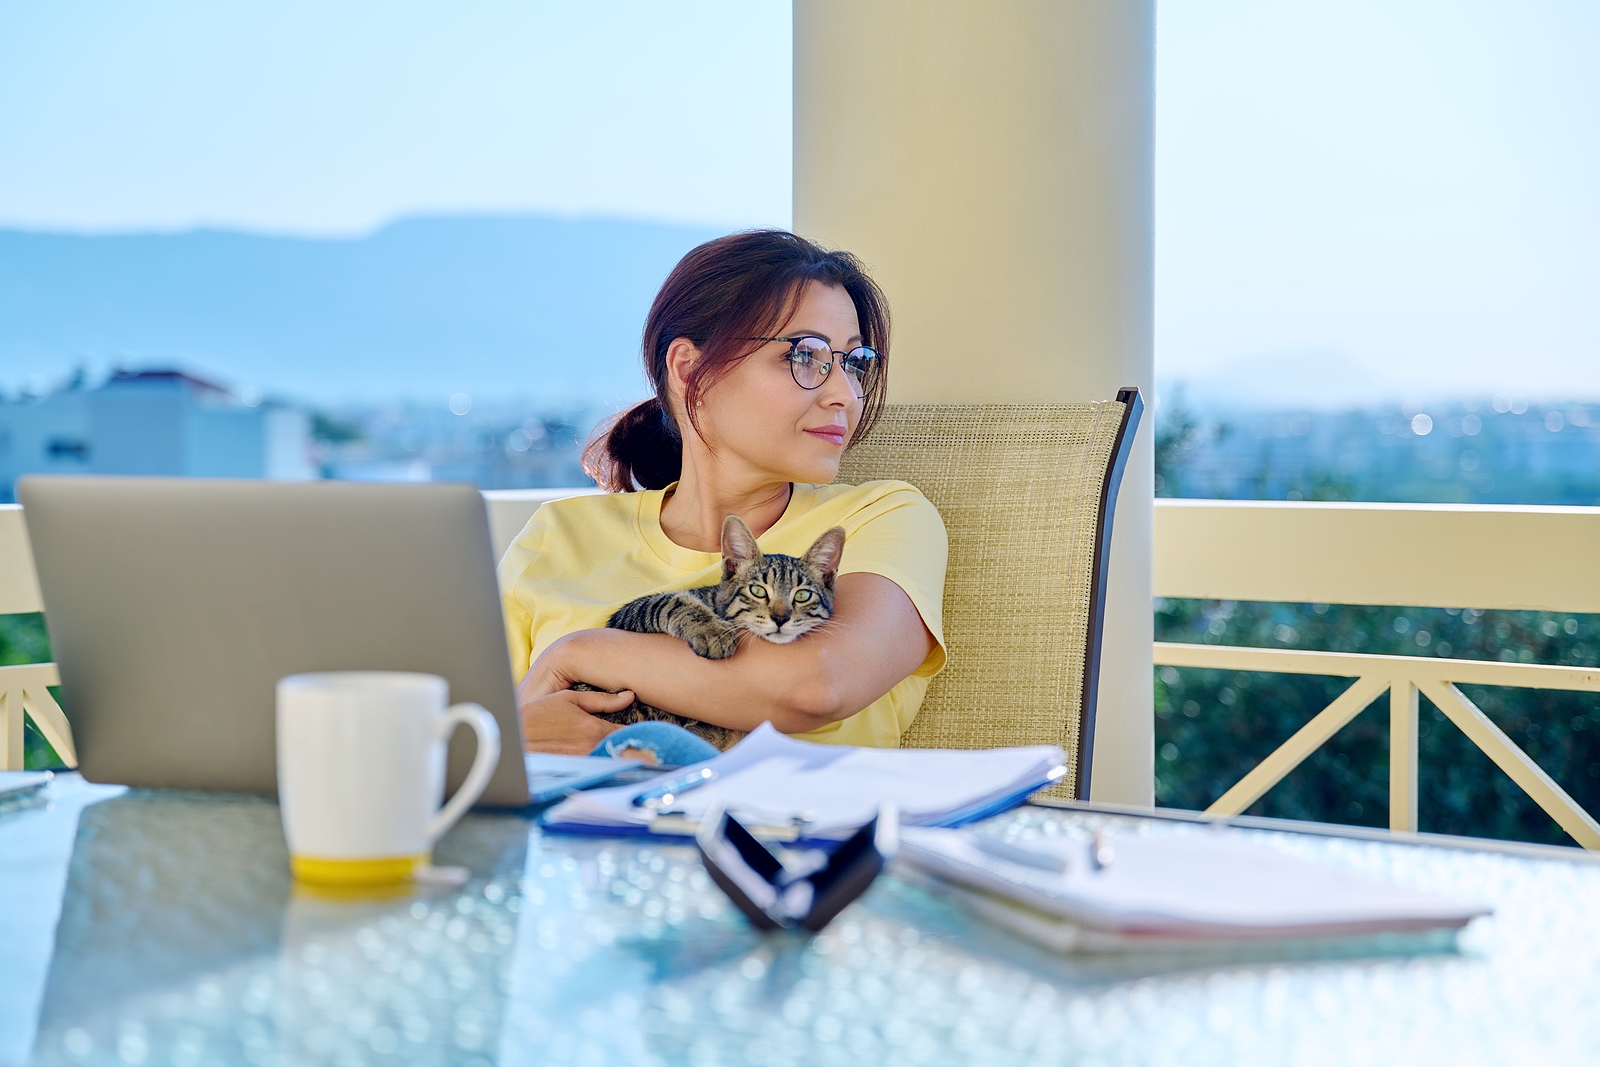 Image of a woman on the computer with her cat in her lap. This image could depict someone who is needing therapy for life transitions in Virginia. Get started today working through transitions with acceptance and commitment therapy with a life transition therapist in Virginia. 23103 | 23005 | 23113